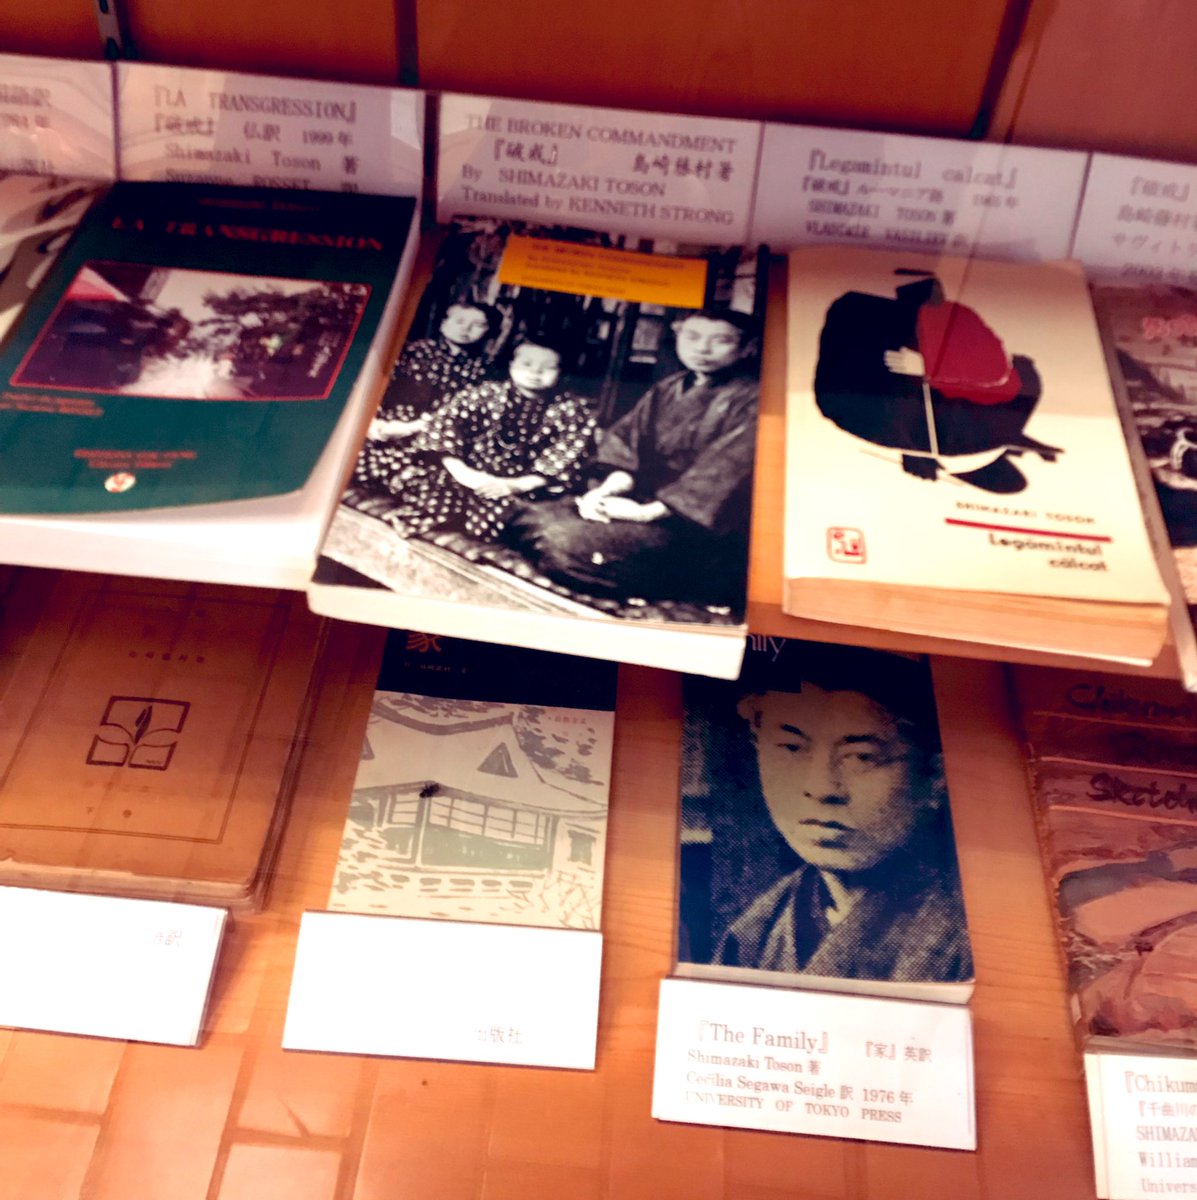 Day 49: memorial museum of the Japanese writer Toson Shimazaki in  #Magome (it was the countryside family home). I had read one of his books before the trip: “The broken commandment” which I highly recommend  #Japan  #Toson  #nakasendotrail